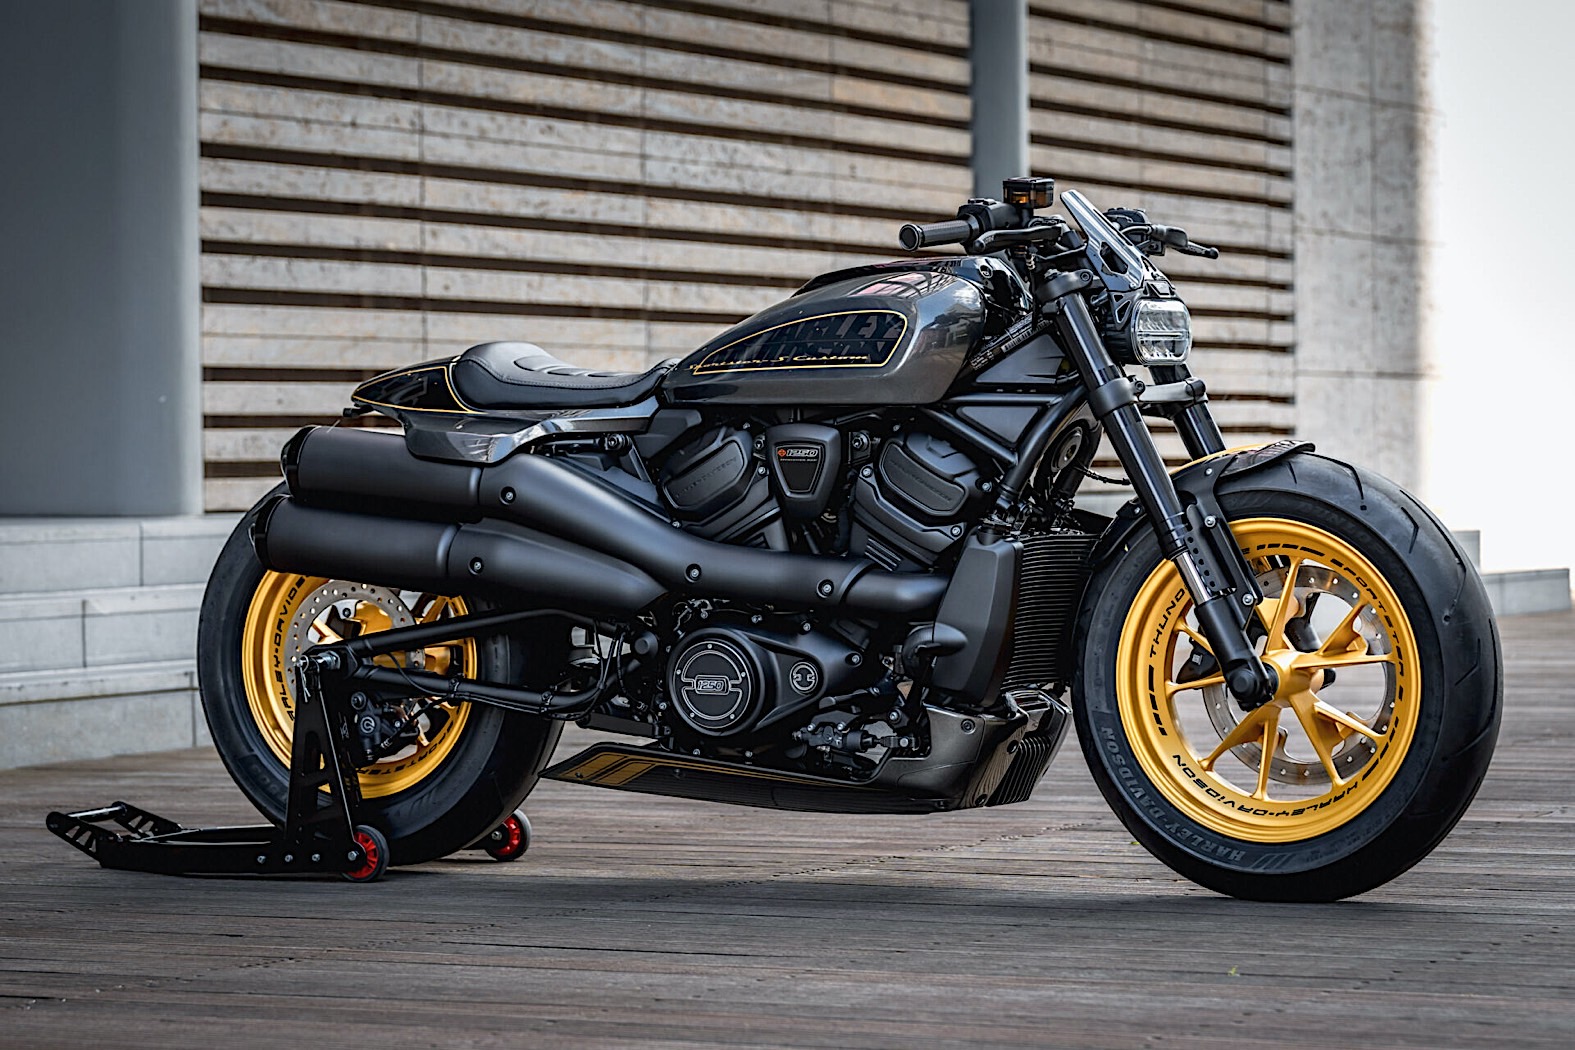 Harley-Davidson P-Type Is the New Sportster in Mean Black and